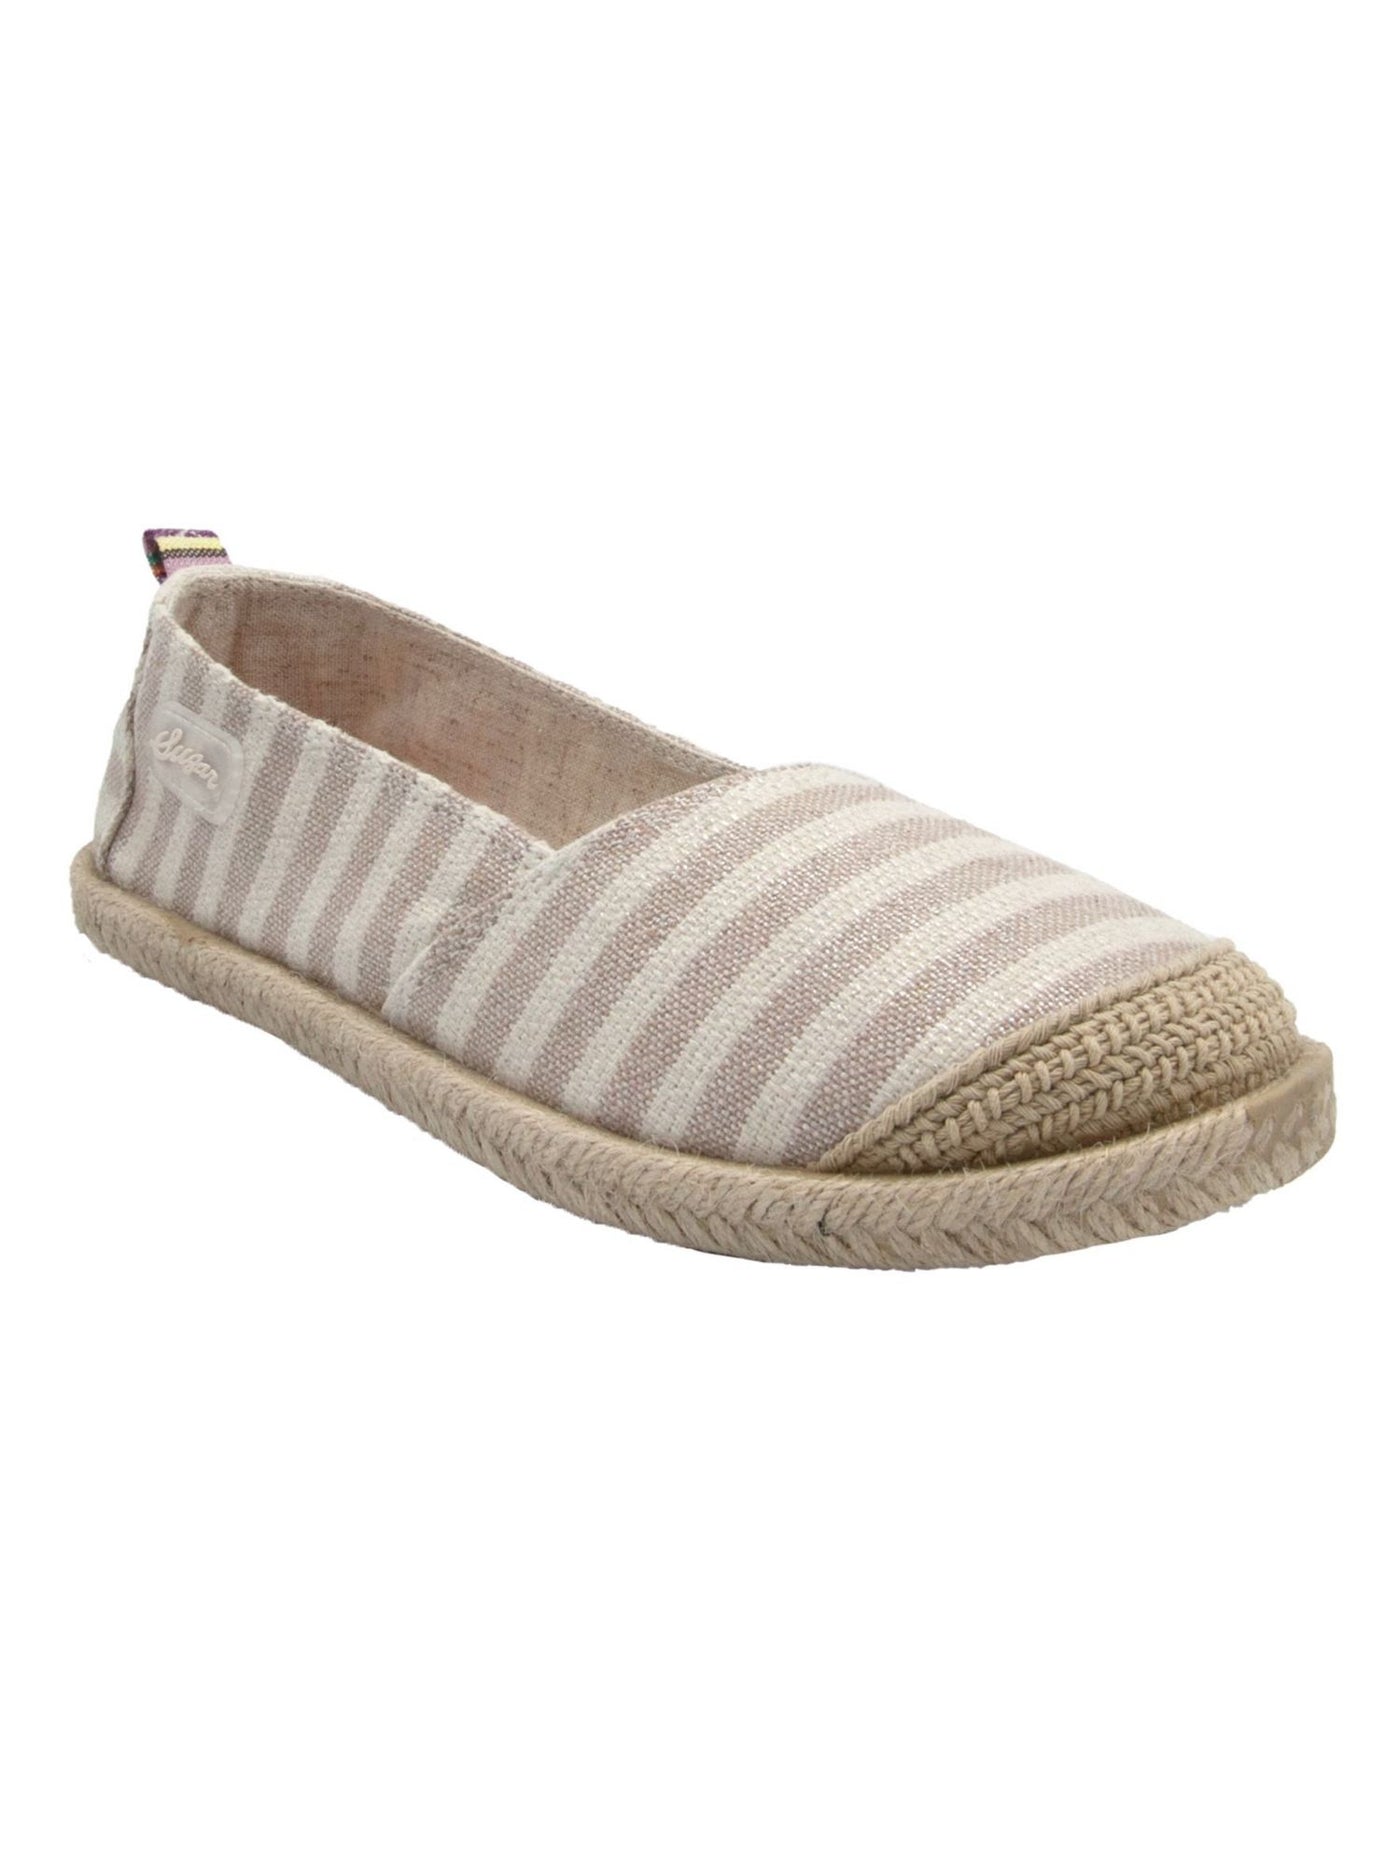 SUGAR Womens Beige Striped Mixed Media Cushioned Goring Evermore Cap Toe Slip On Espadrille Shoes 7